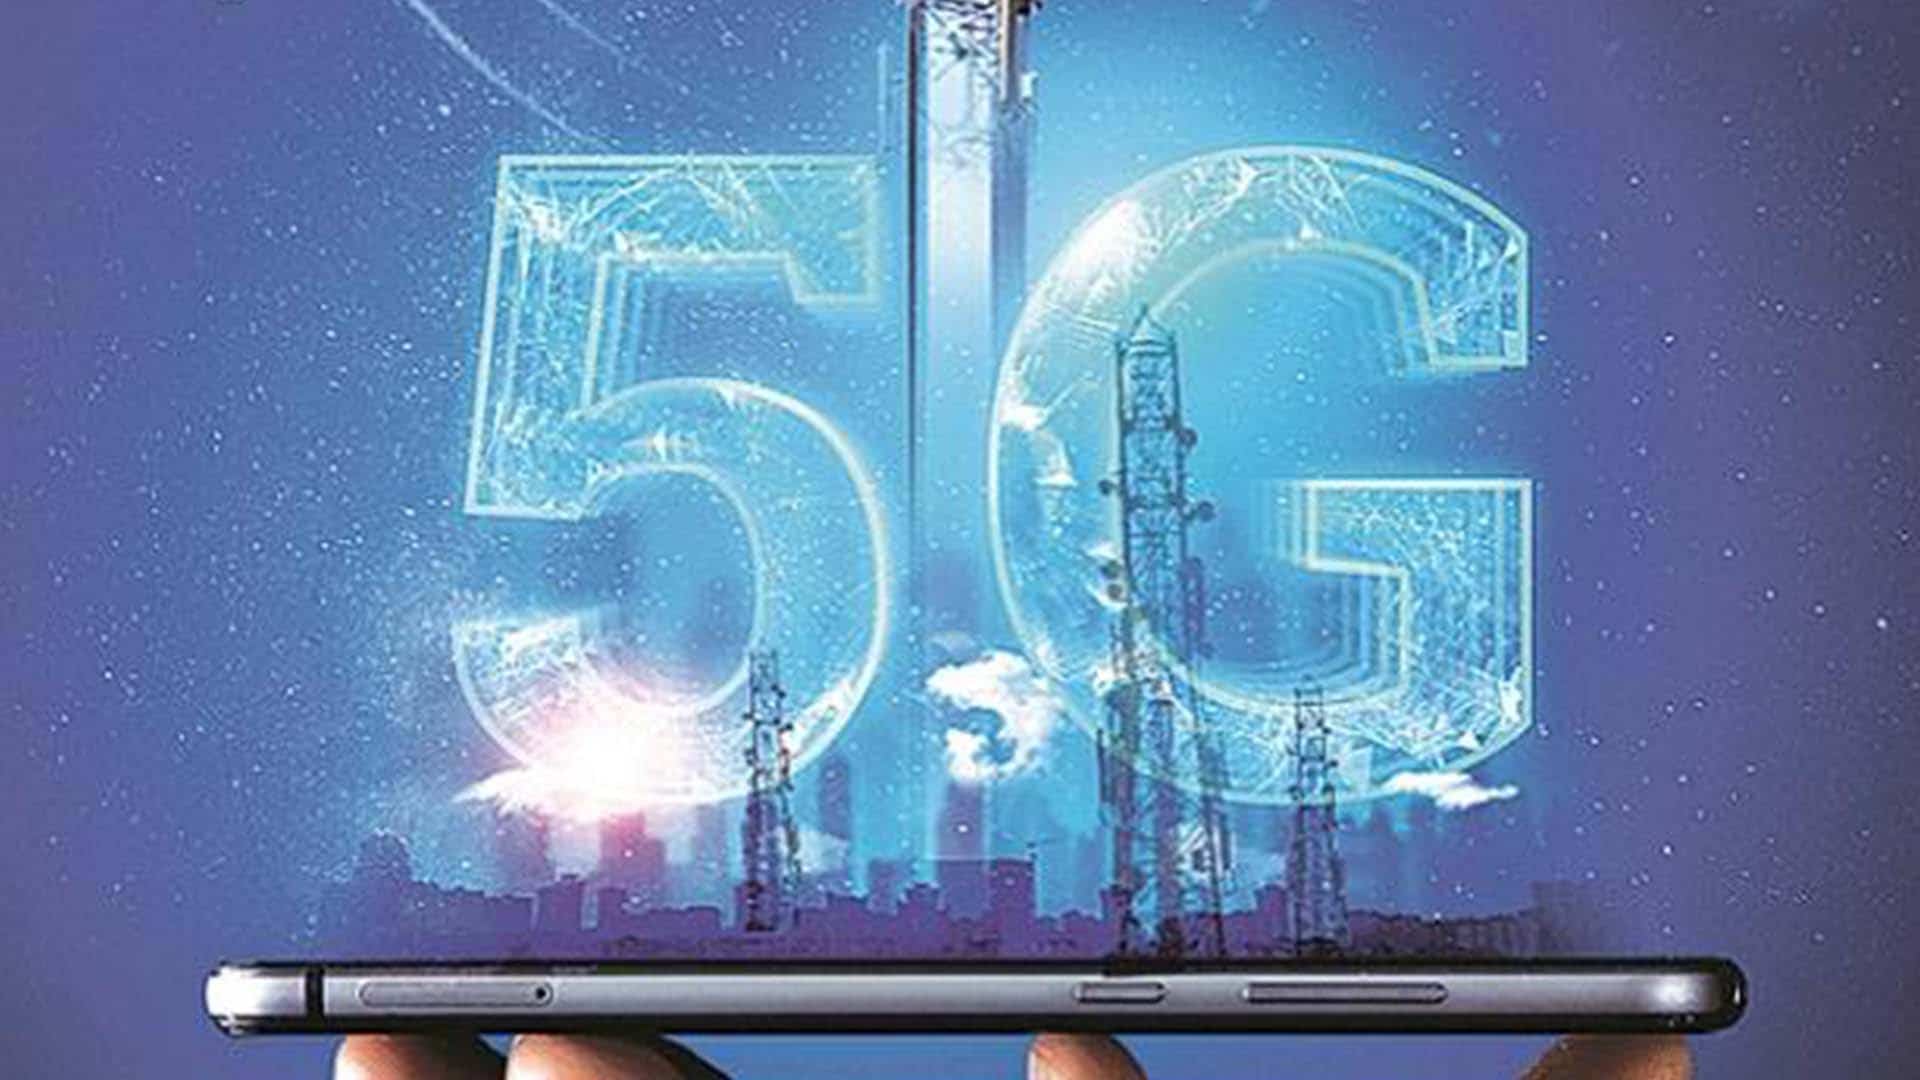 Mike Church Show-The 5G Rollout Is Nothing More Than An Expansion Of The Spyfare State